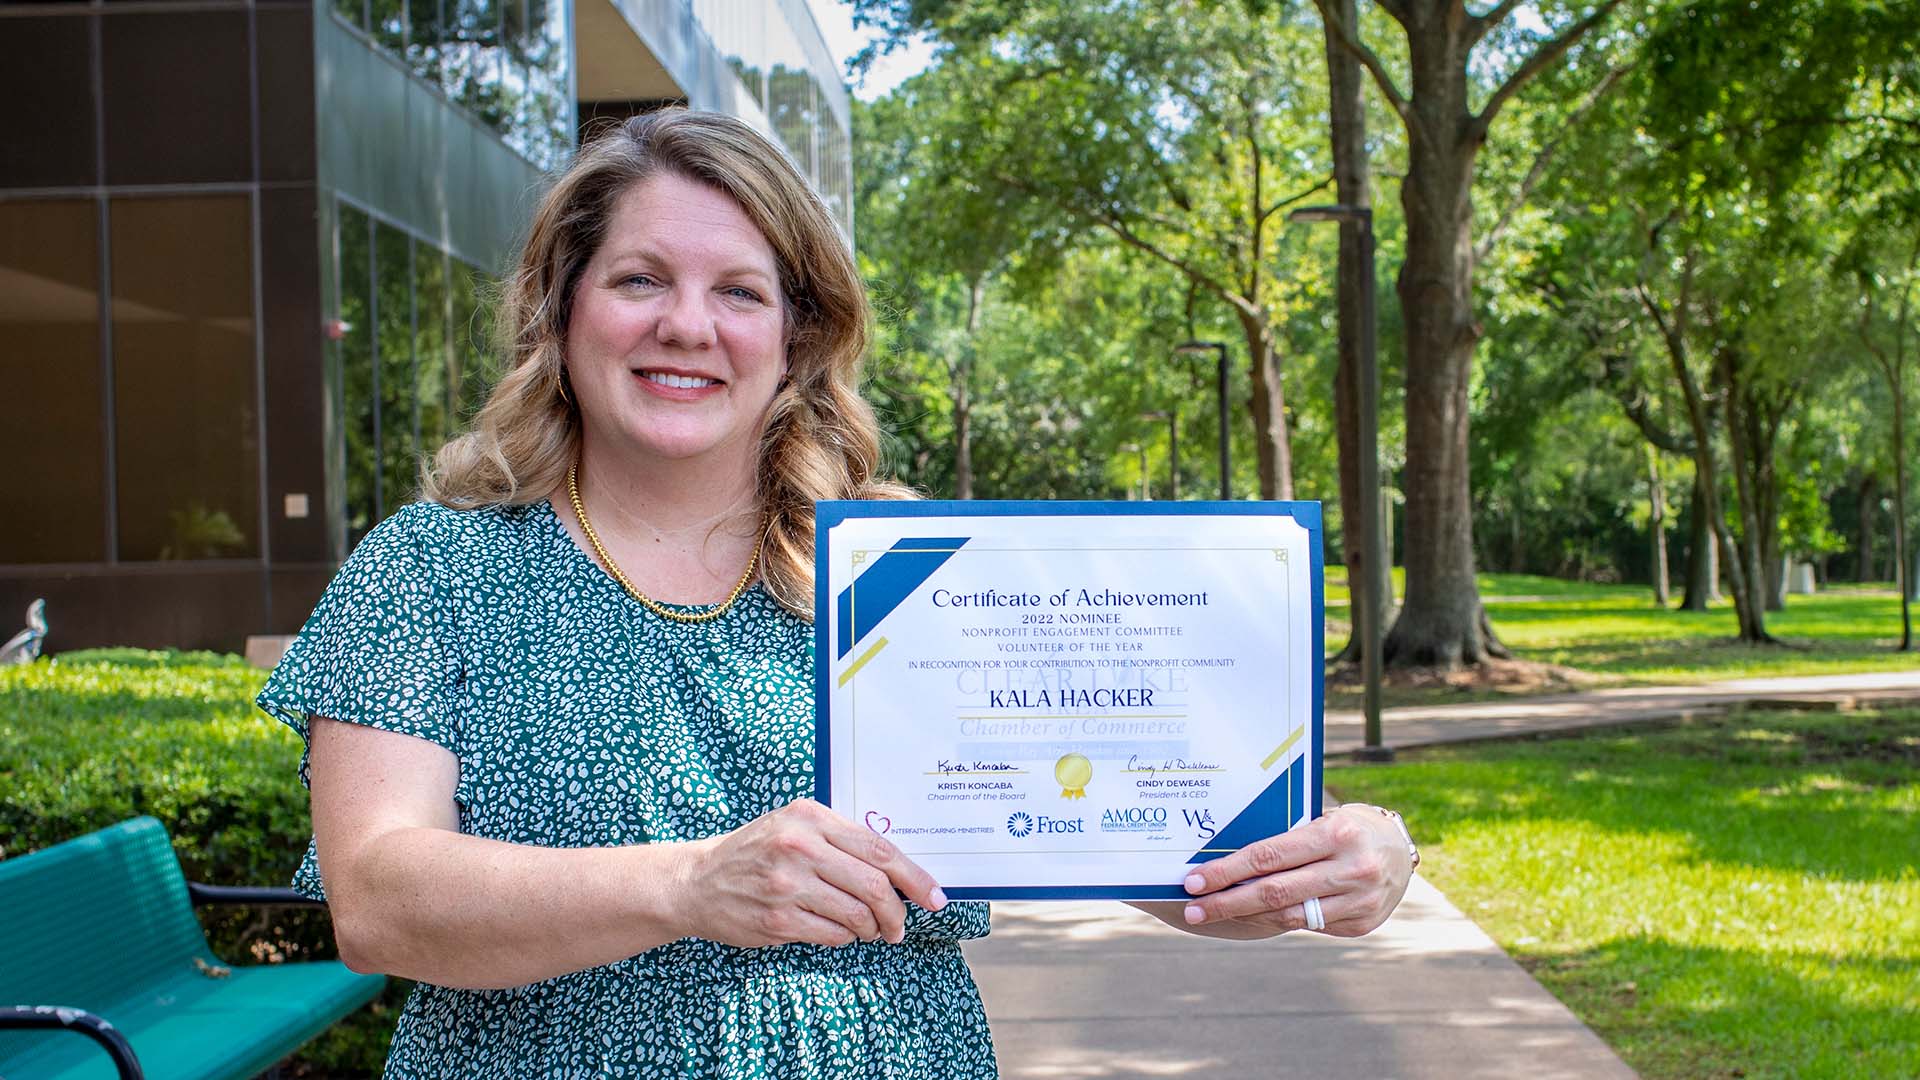 UHCL alum honored for volunteering: 'Helping people is close to my heart'